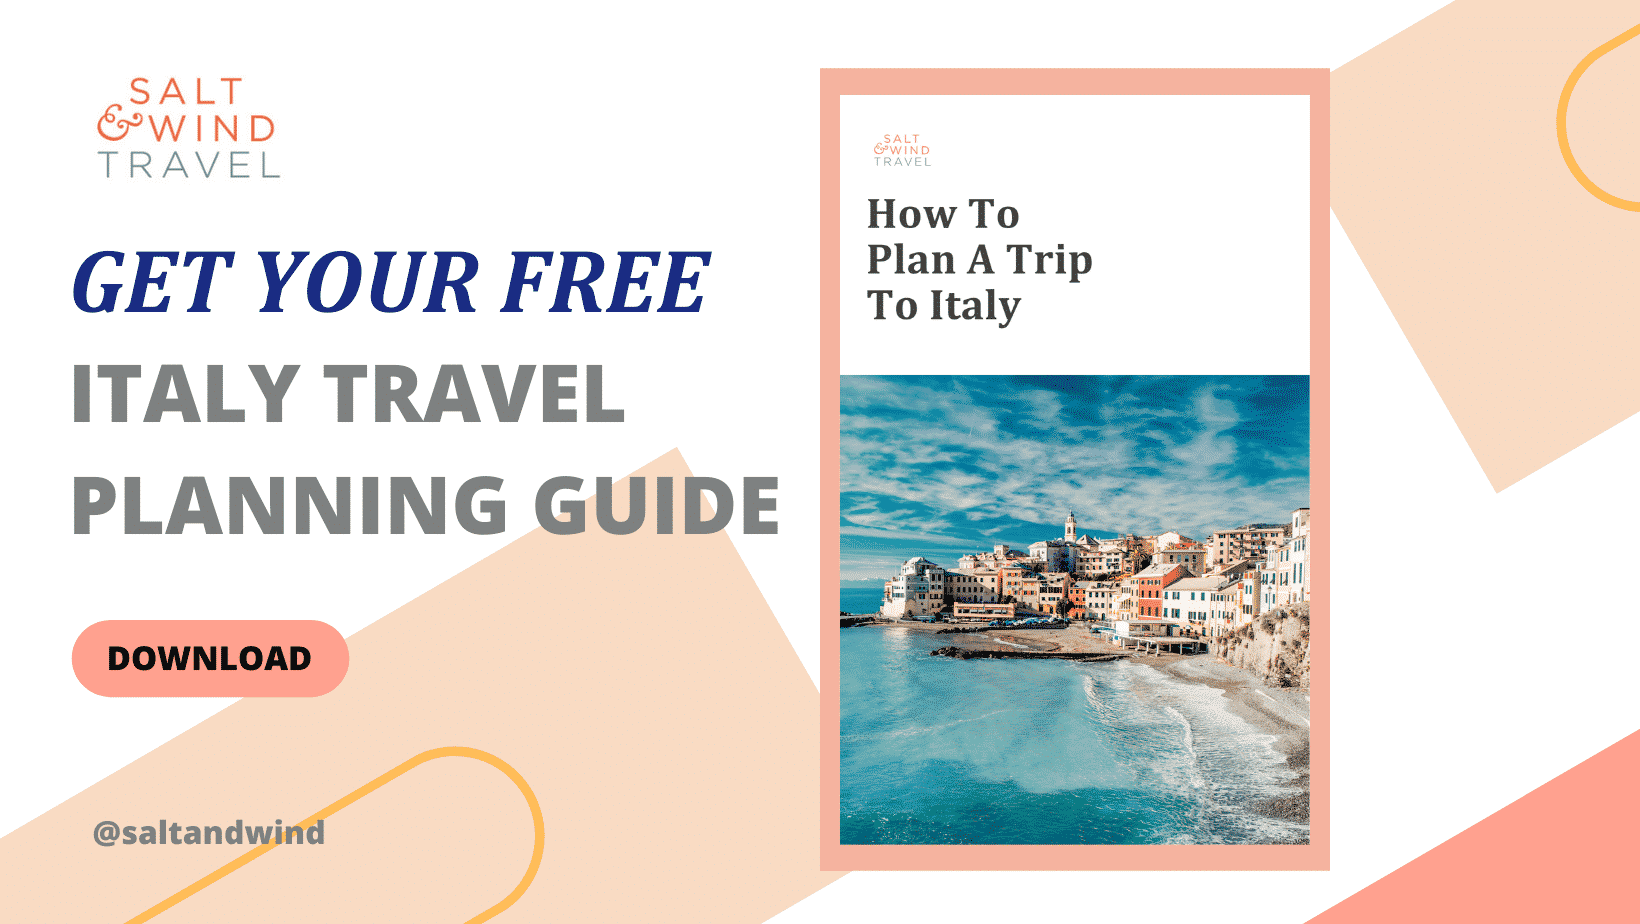 Link To Download Free Italy Travel Planning Guide